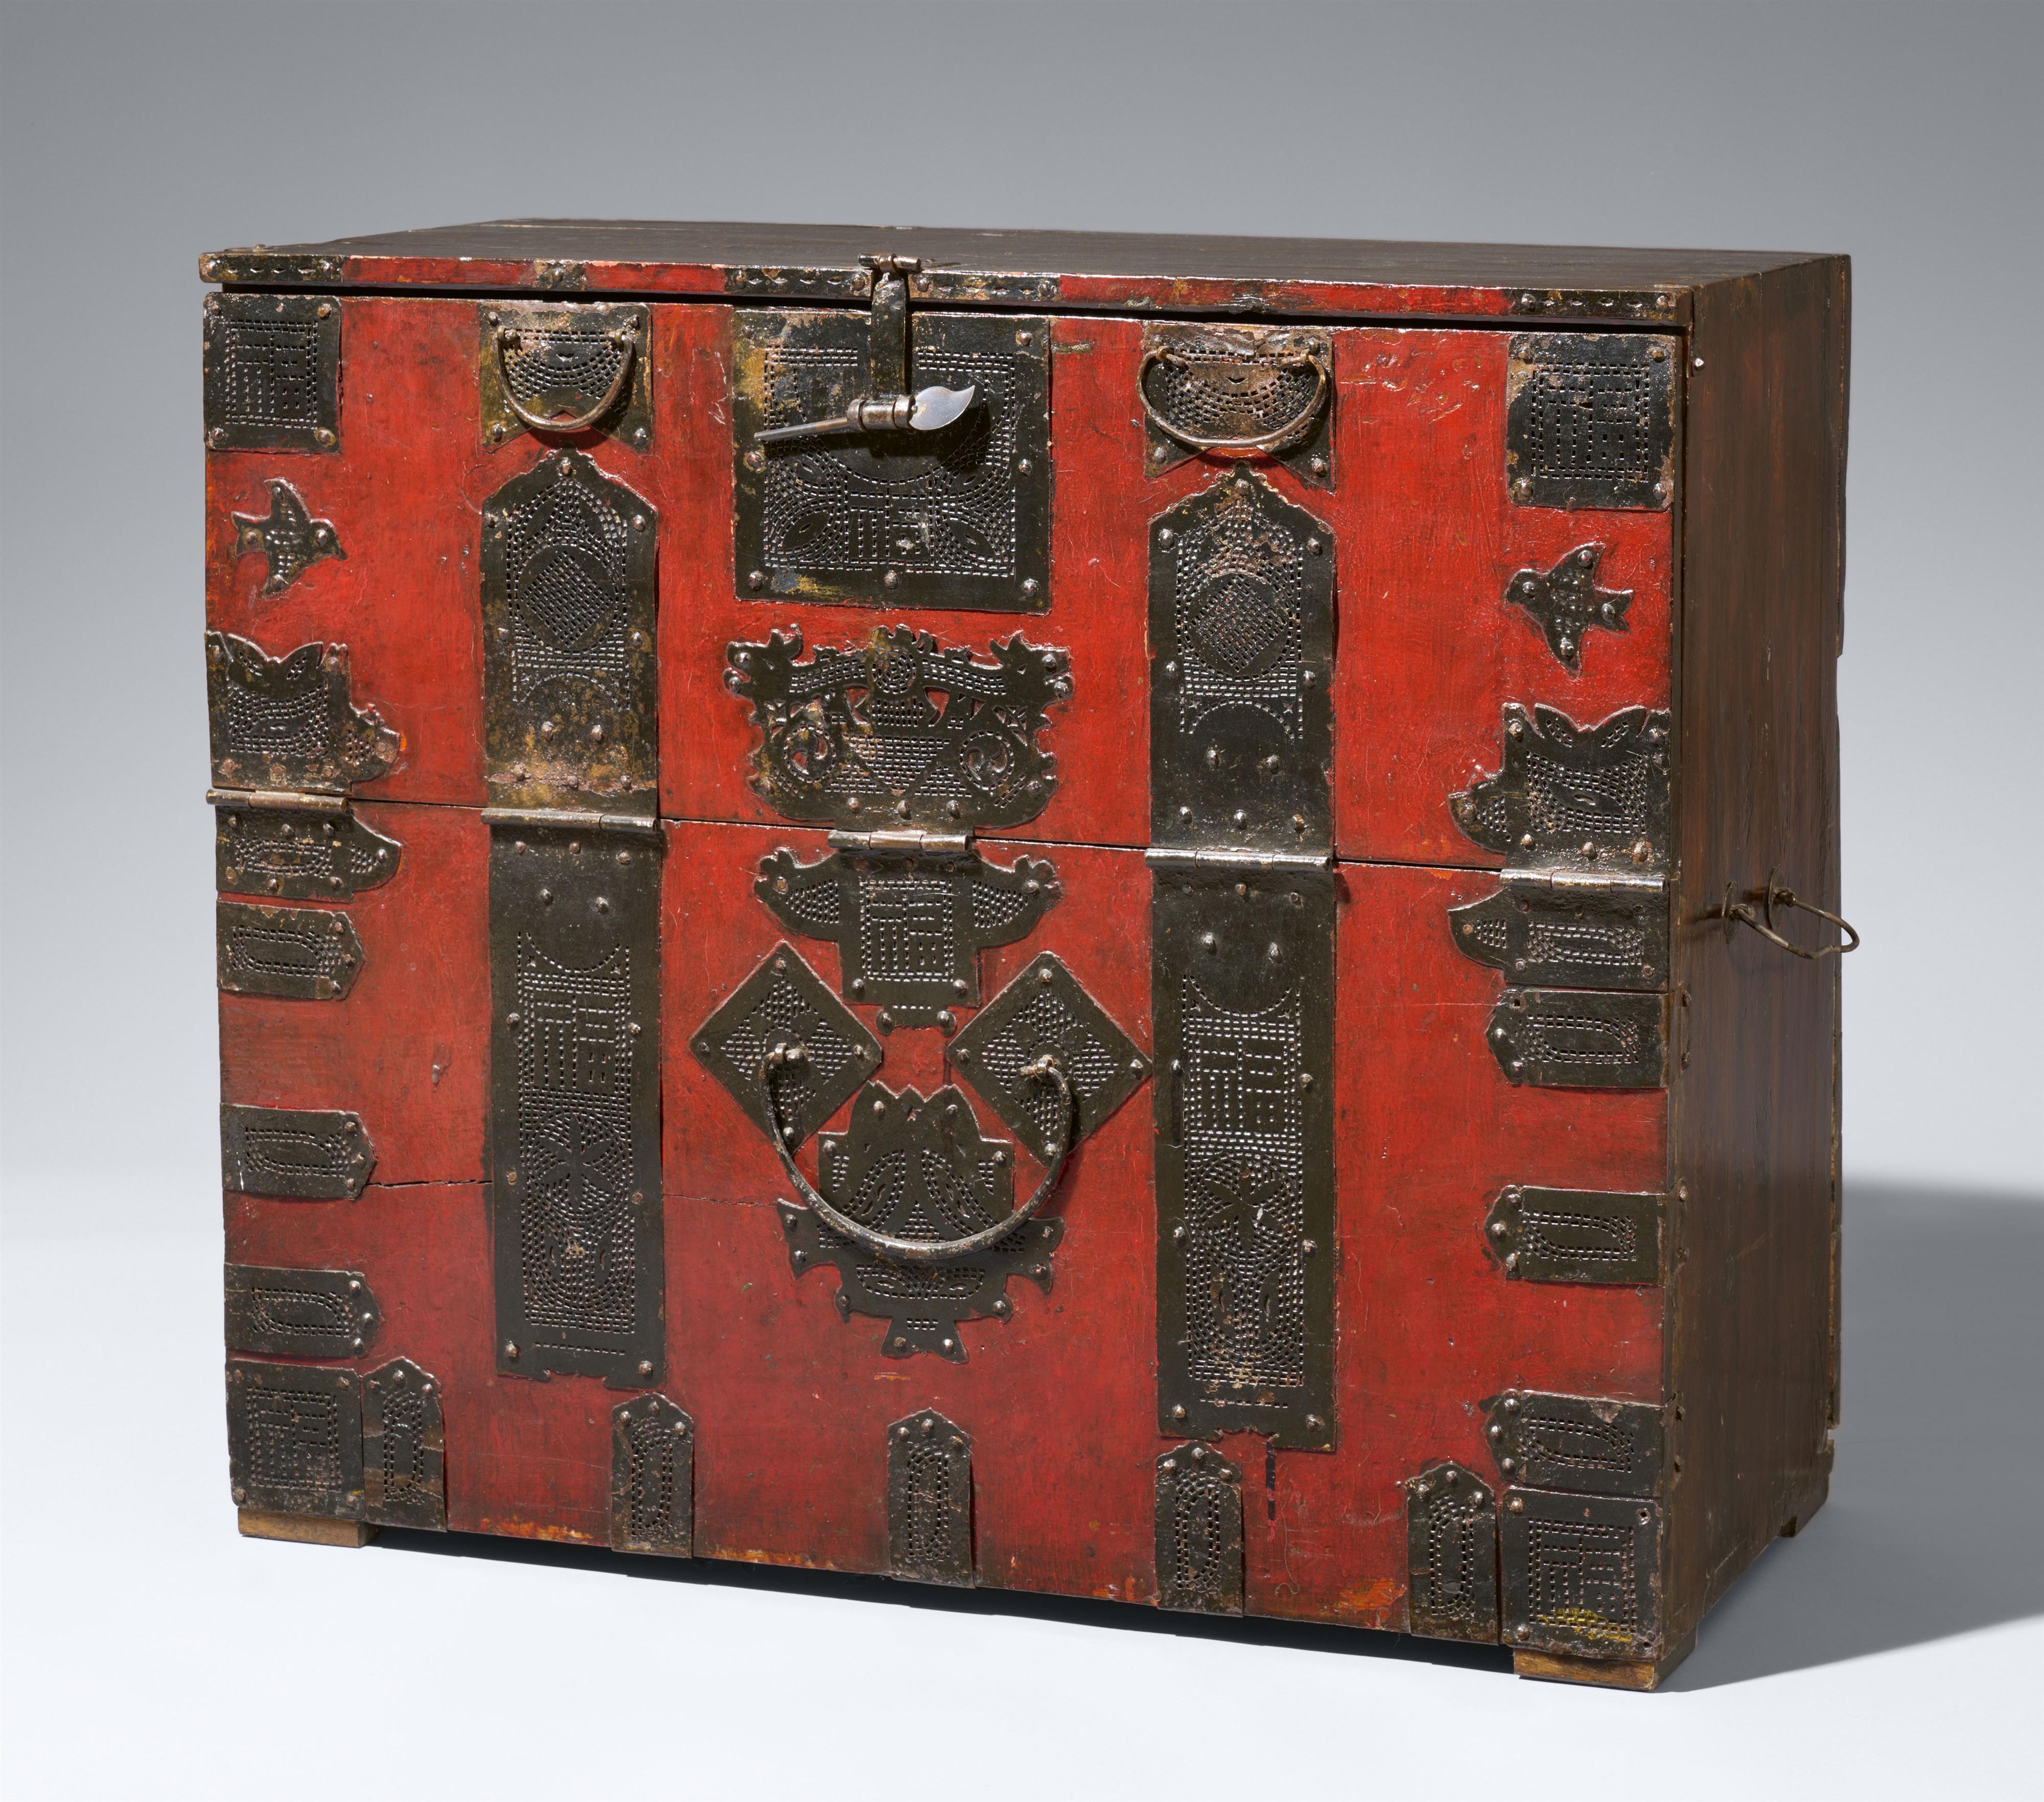 A lacquered pine wood clothing chest (bandaiji). Present-day North Korea, Pakchon area. Mid-19th century - image-1